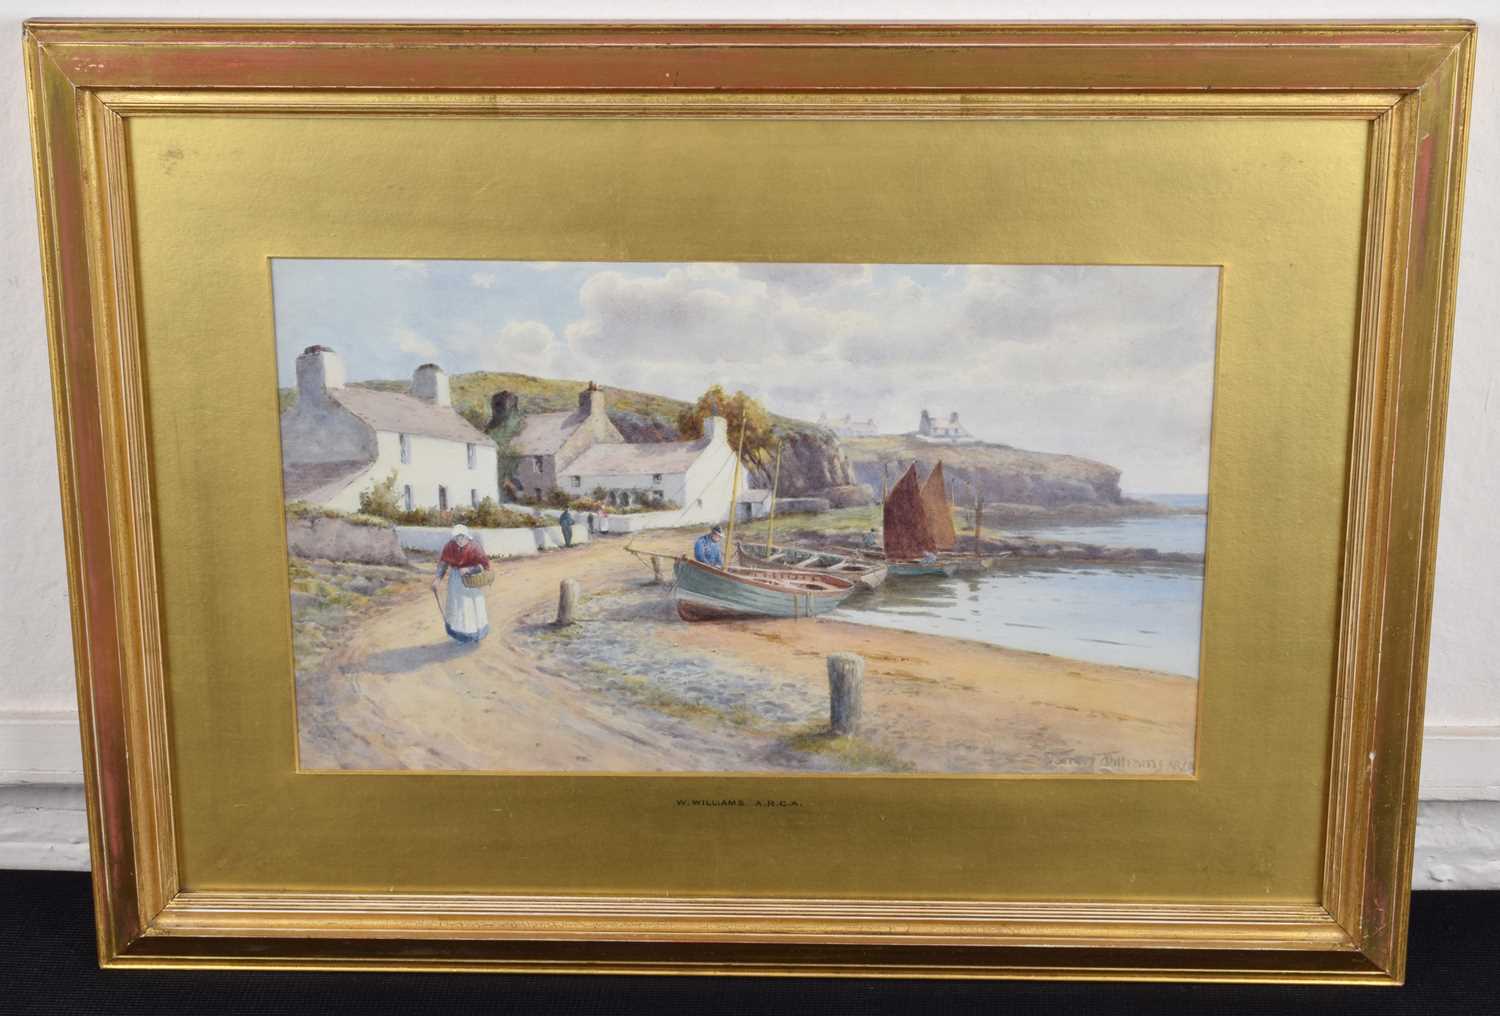 Warren Williams A.R.C.A. (British 1863-1941) "The Road by the Shore, Cemaes", watercolour. - Image 2 of 2